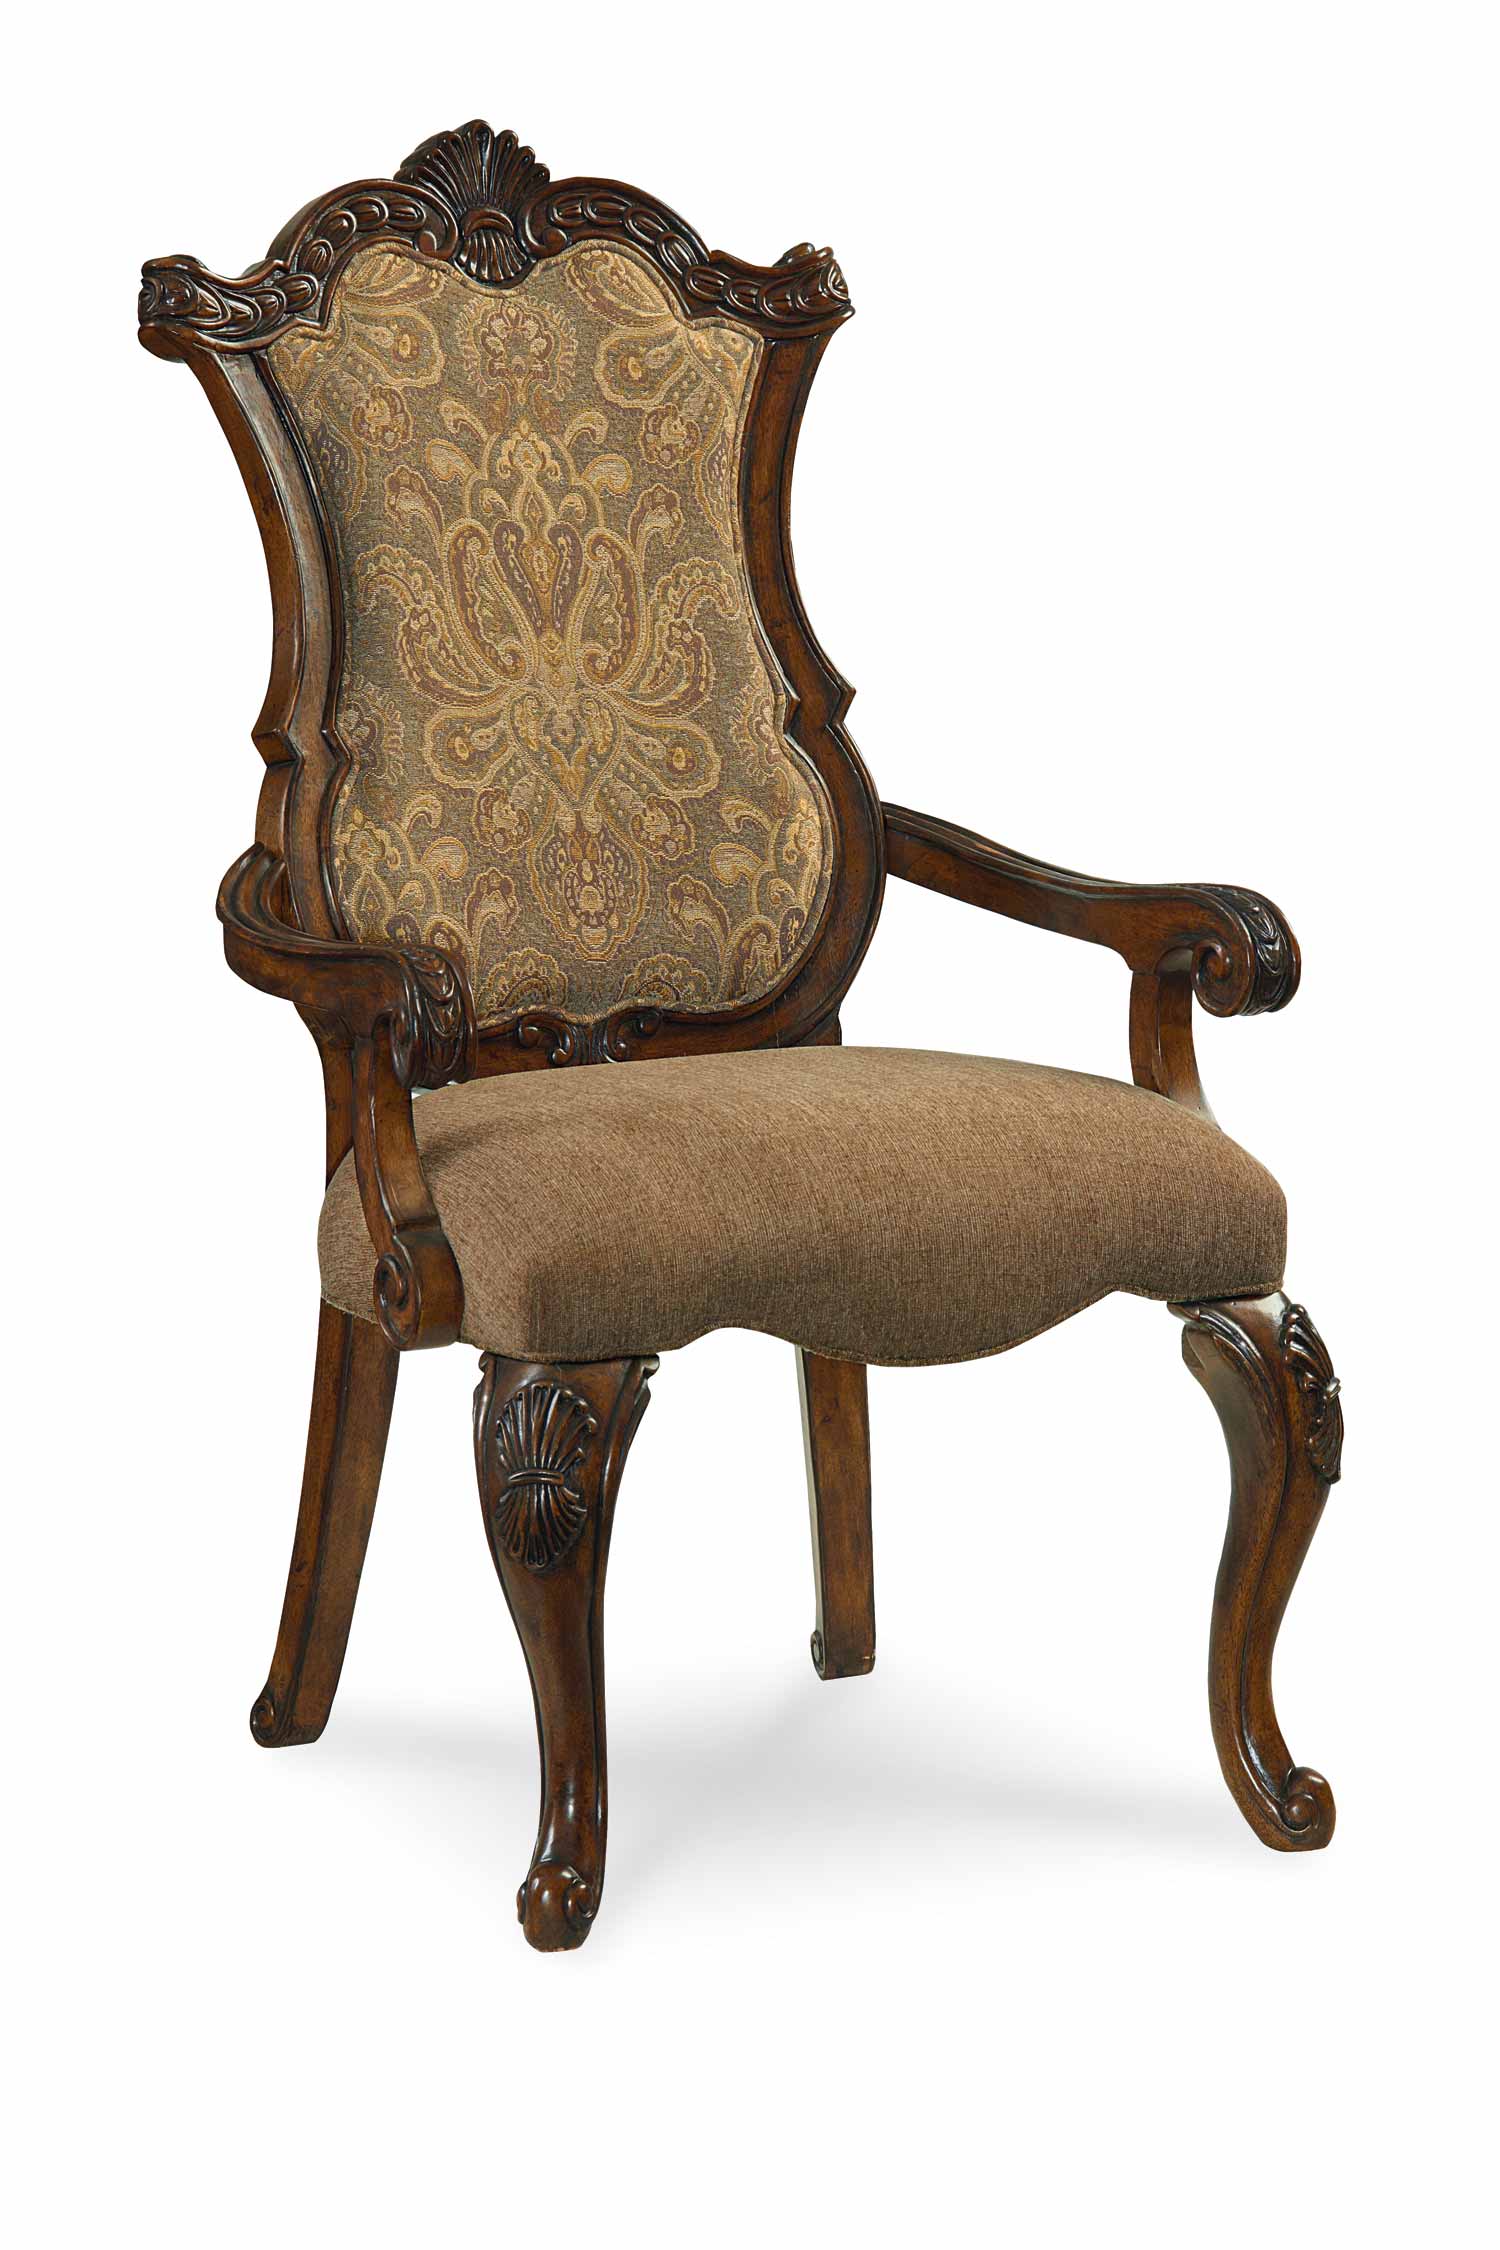 Legacy Classic Pemberleigh Upholstered Arm Chair - Brandy/Burnished Edges